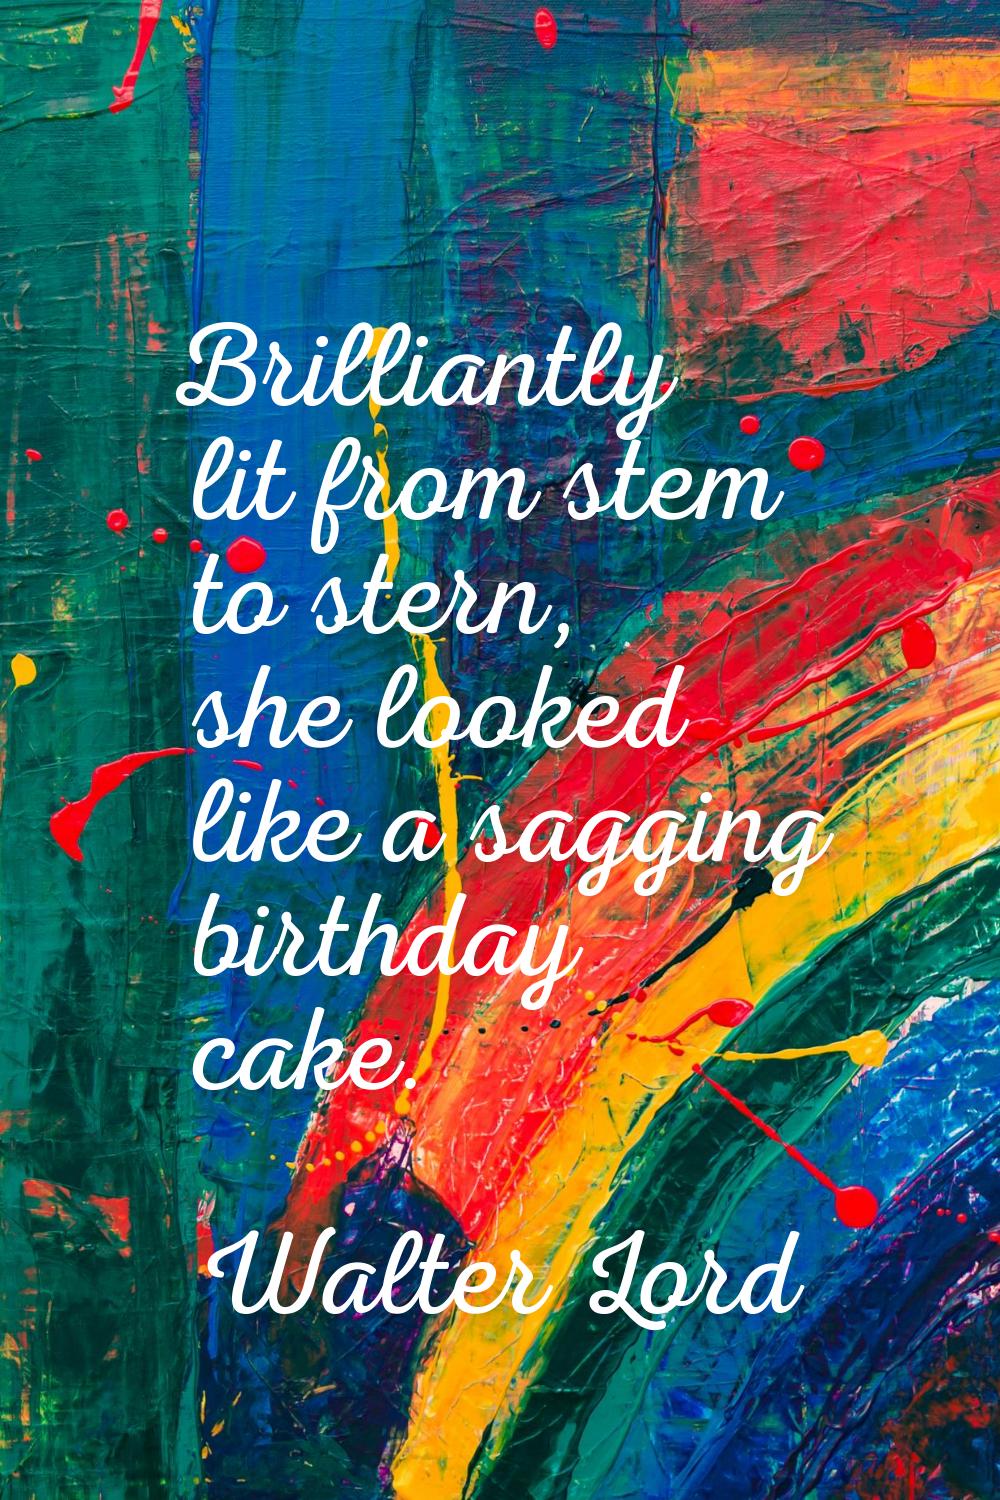 Brilliantly lit from stem to stern, she looked like a sagging birthday cake.